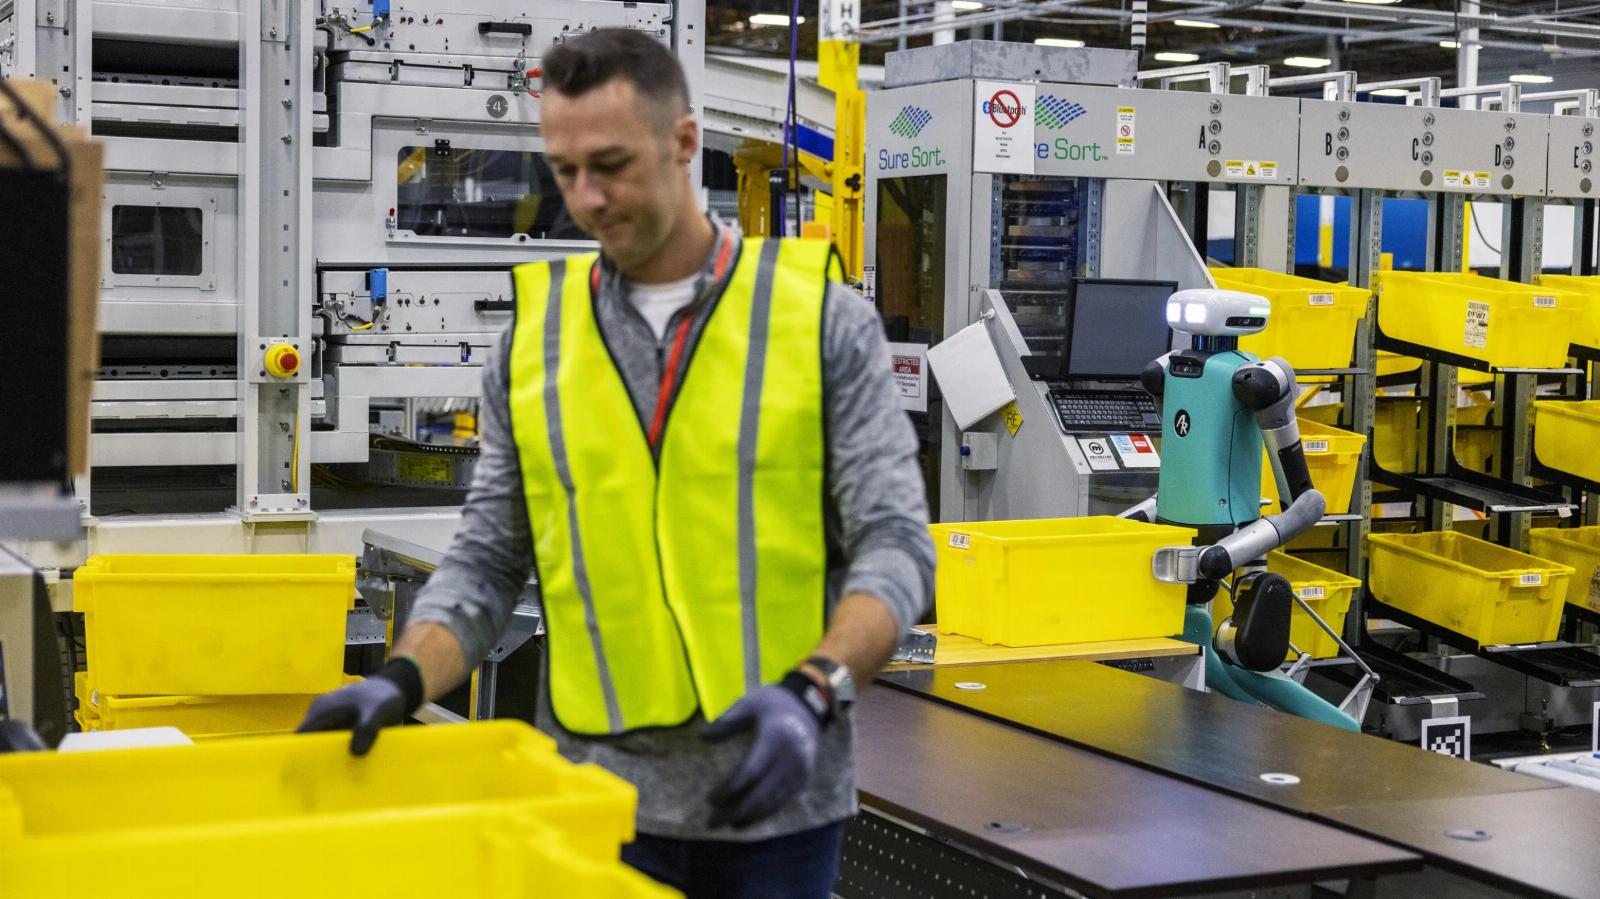 Amazon eyes AI, autonomous vehicles and Asia as $1B industrial innovation fund evolves